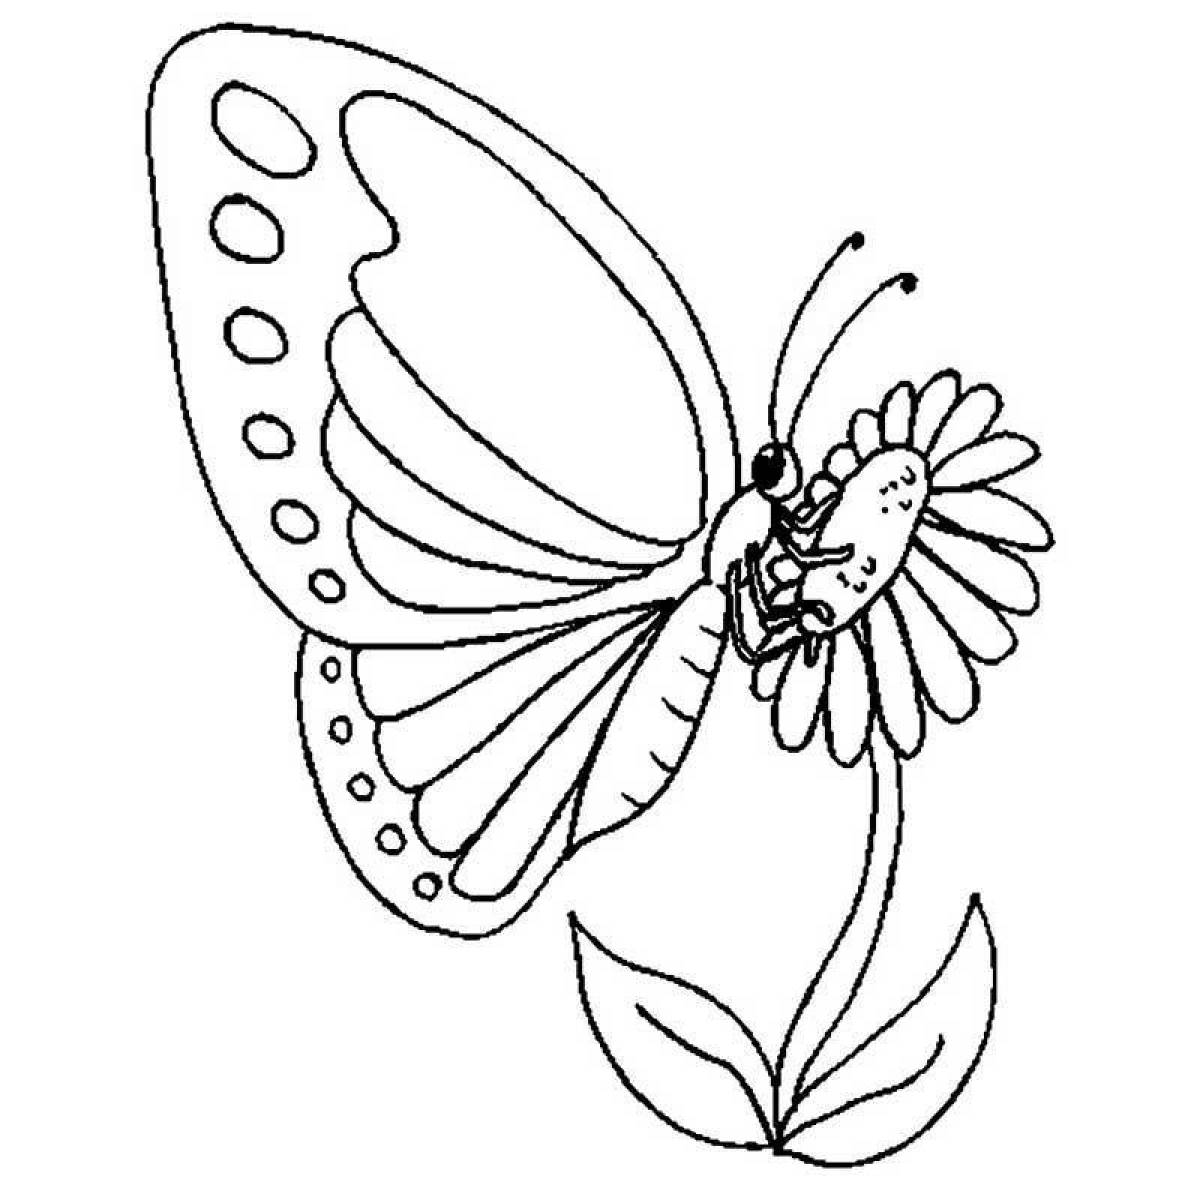 A wonderful drawing of a butterfly